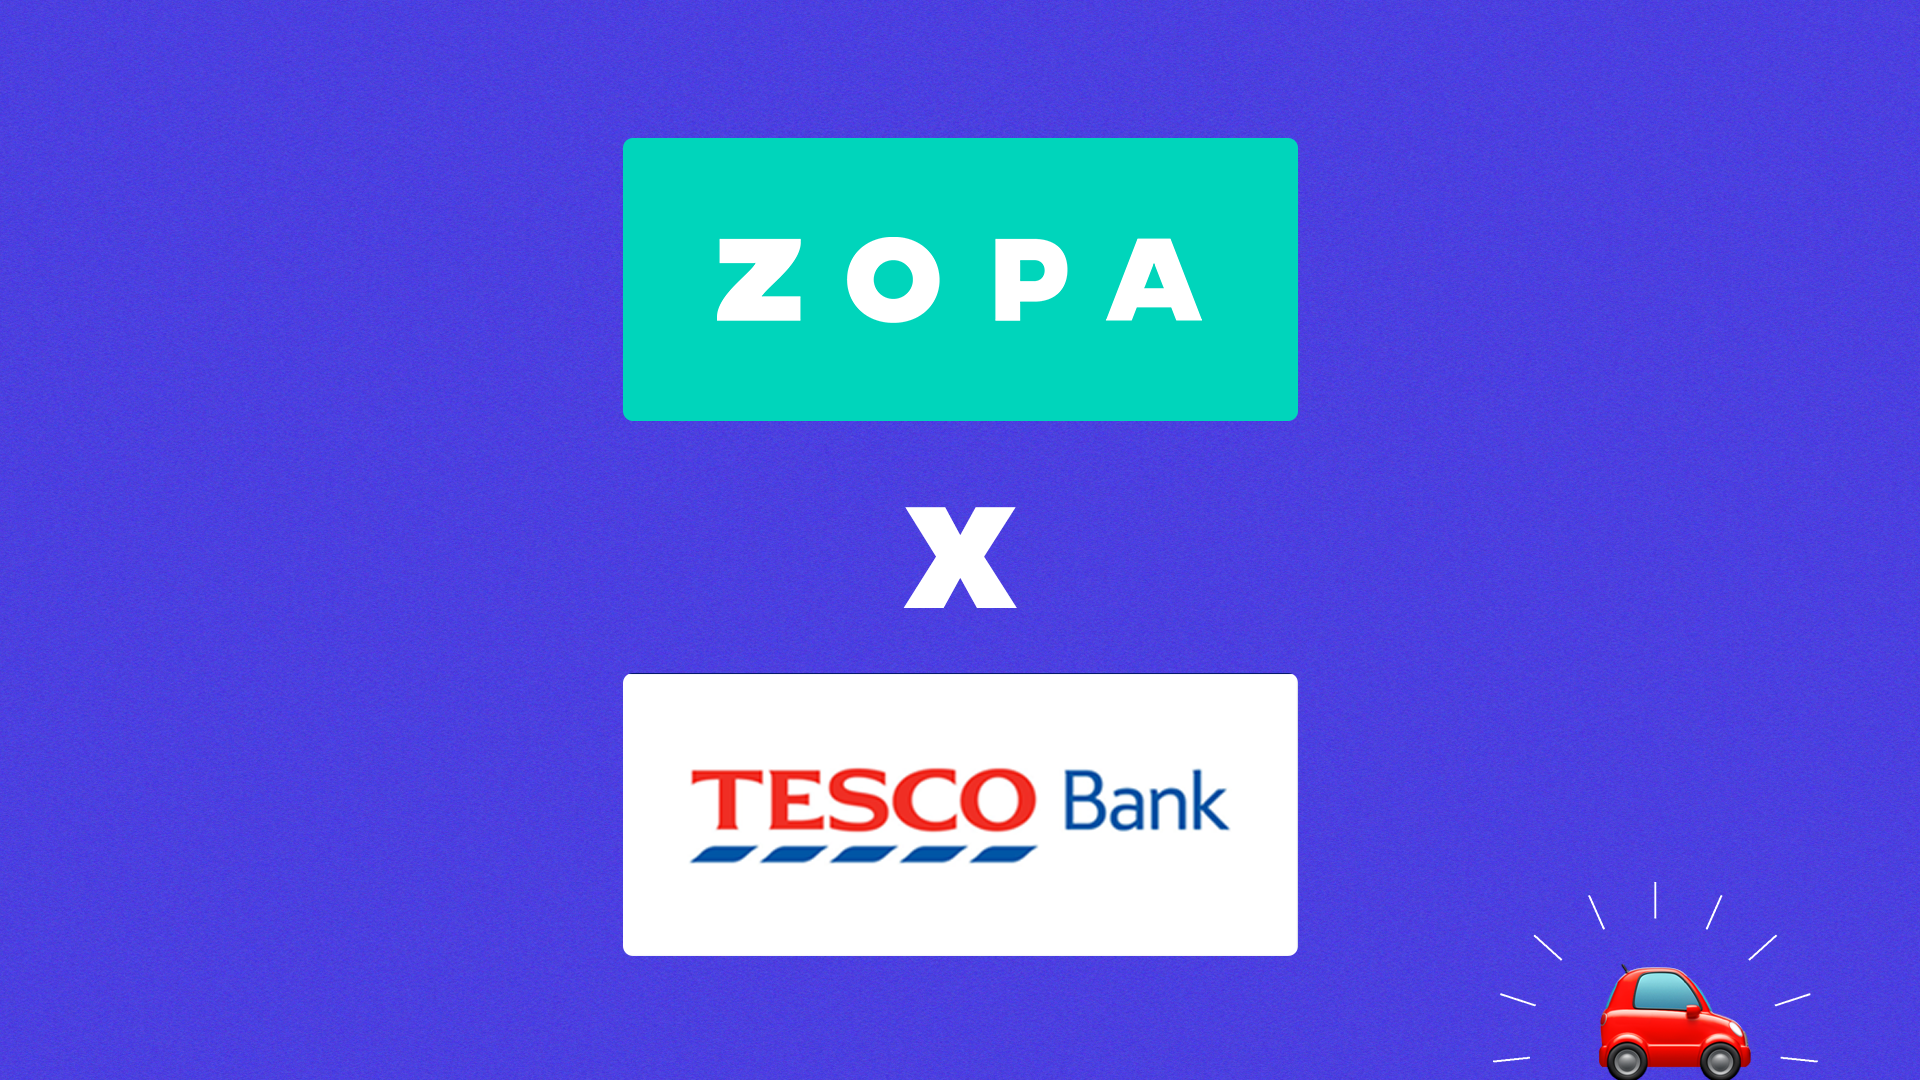 tesco-bank-partners-with-zopa-to-offer-online-car-financing-to-millions-of-uk-dri